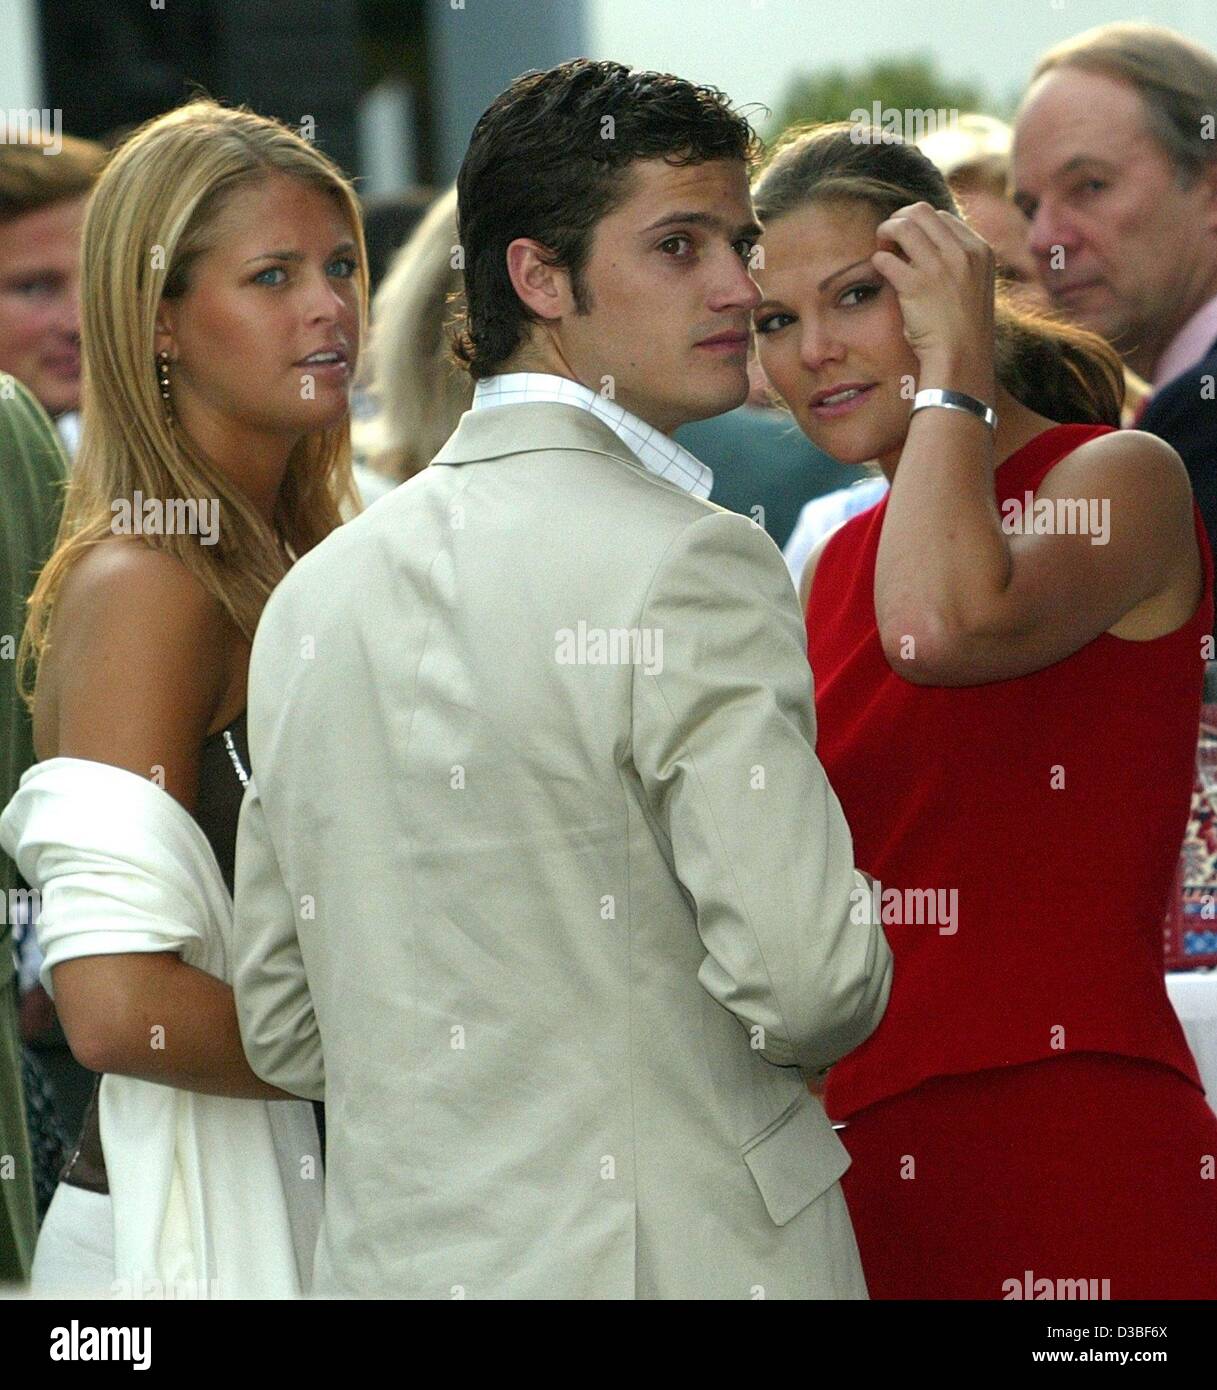 (dpa) - Crown Princess Victoria of Sweden (M) stands together with her sister Princess Madeleine and her brother Prince Carl Philip at Prince Leopold of Bavaria's birthday party in Rottach-Egern, Germany, 28 June 2003. Prince Leopold, or Poldi as his friends call him, invited royals and important pe Stock Photo